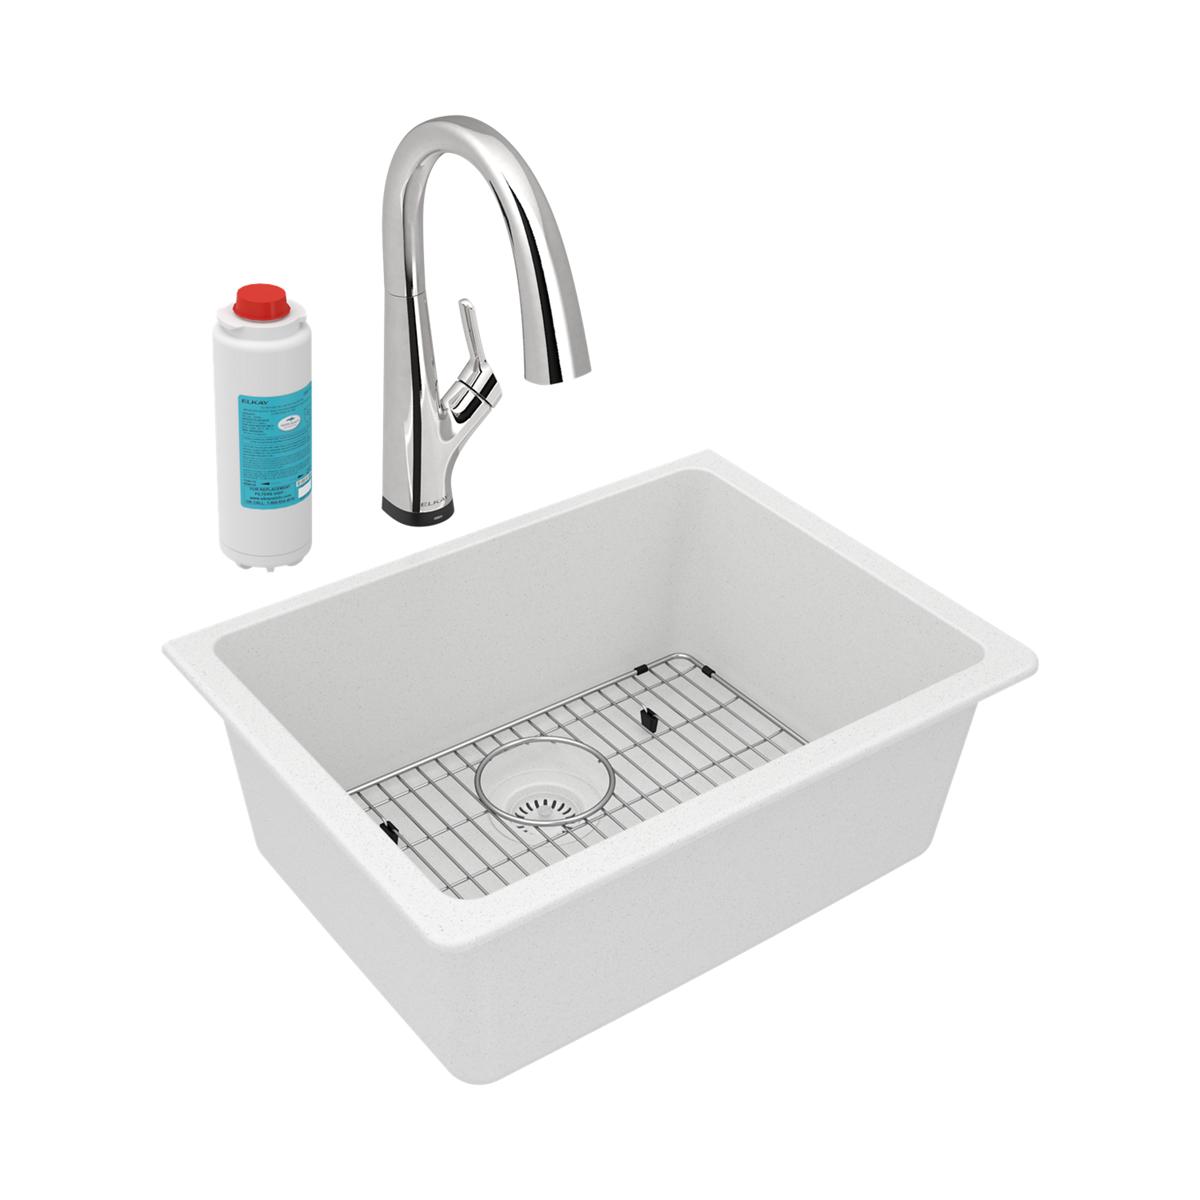 Elkay Quartz Classic 24-5/8" x 18-1/2" x 9-1/2" Single Bowl Undermount Sink Kit with Filtered Faucet